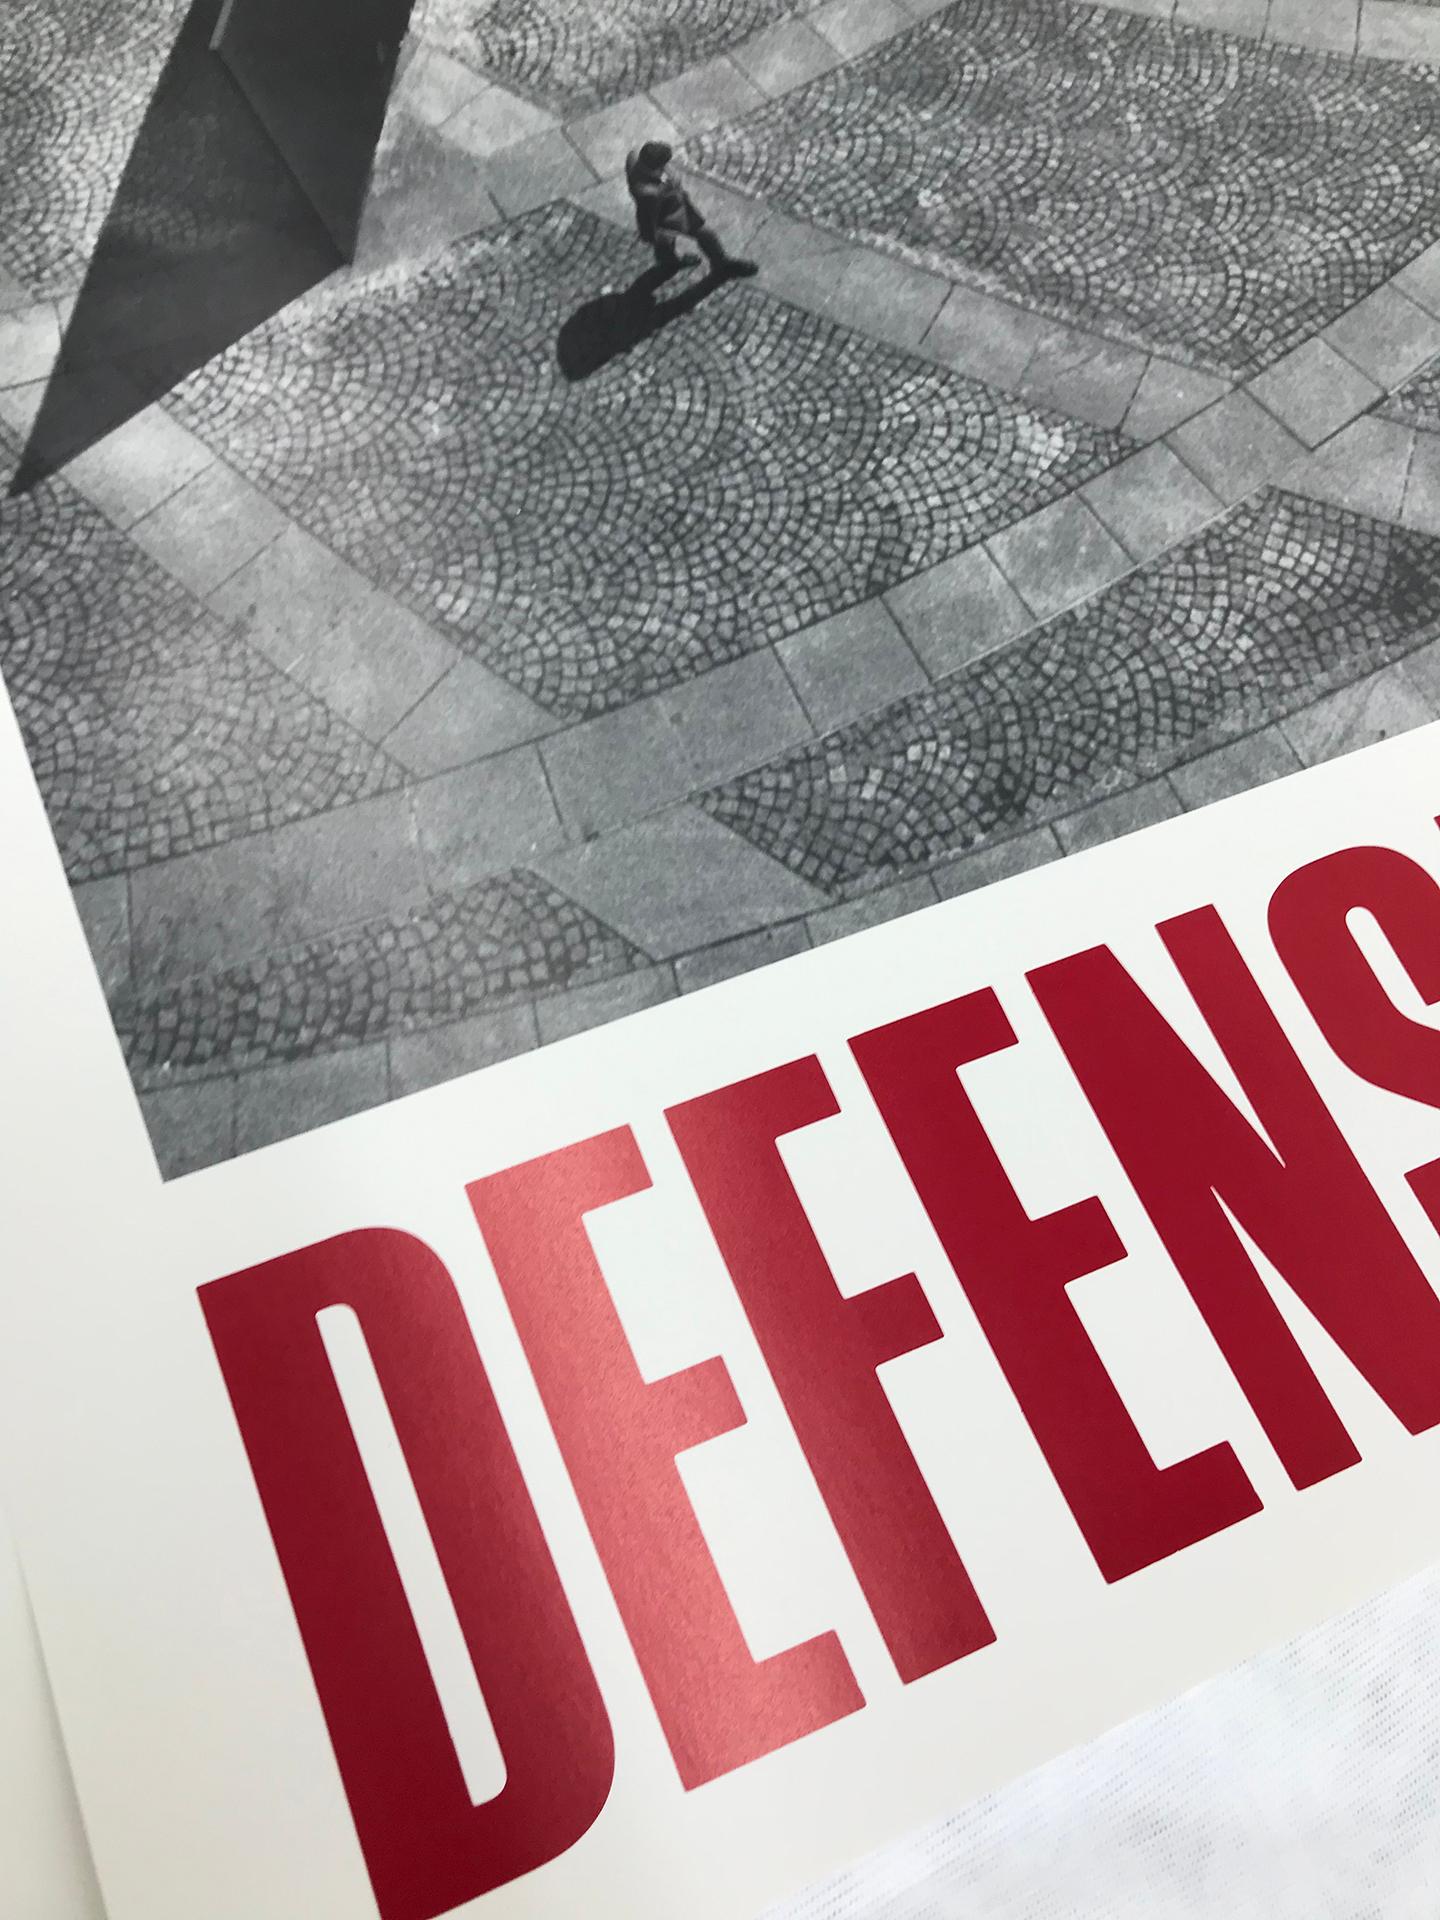 Richard Serra 
Tilted Arc Defense Fund, 1985 
offset lithograph poster 
published by Leo Castelli, New York 
38 x 22.5 inches (97 x 57 cm)
unsigned
*This item will be shipped in a tube unless otherwise requested

Richard Serra Tilted Arc (1981) was